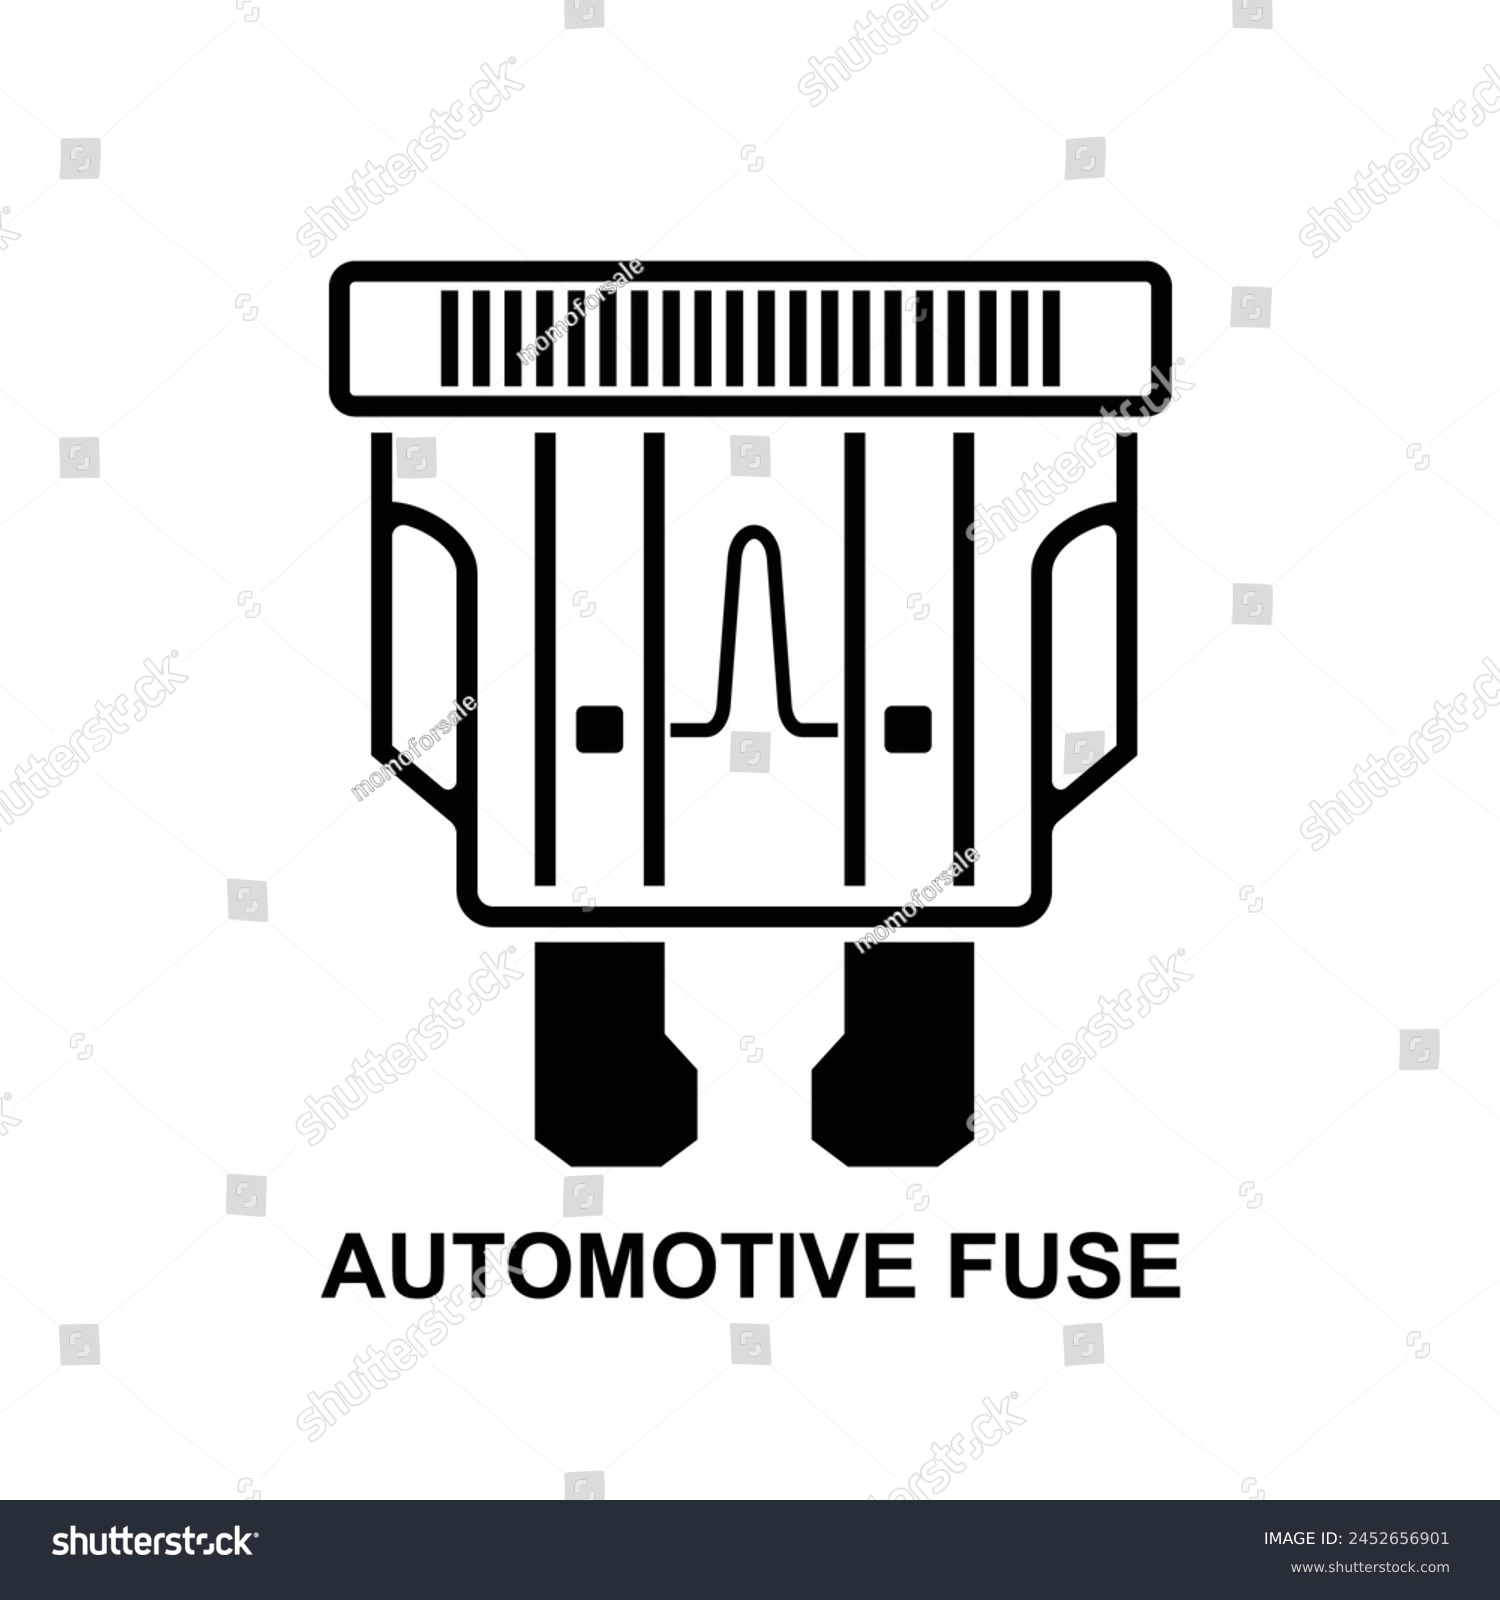 SVG of Automotive fuse icon. Car plug fuse isolated on background vector illustration. svg